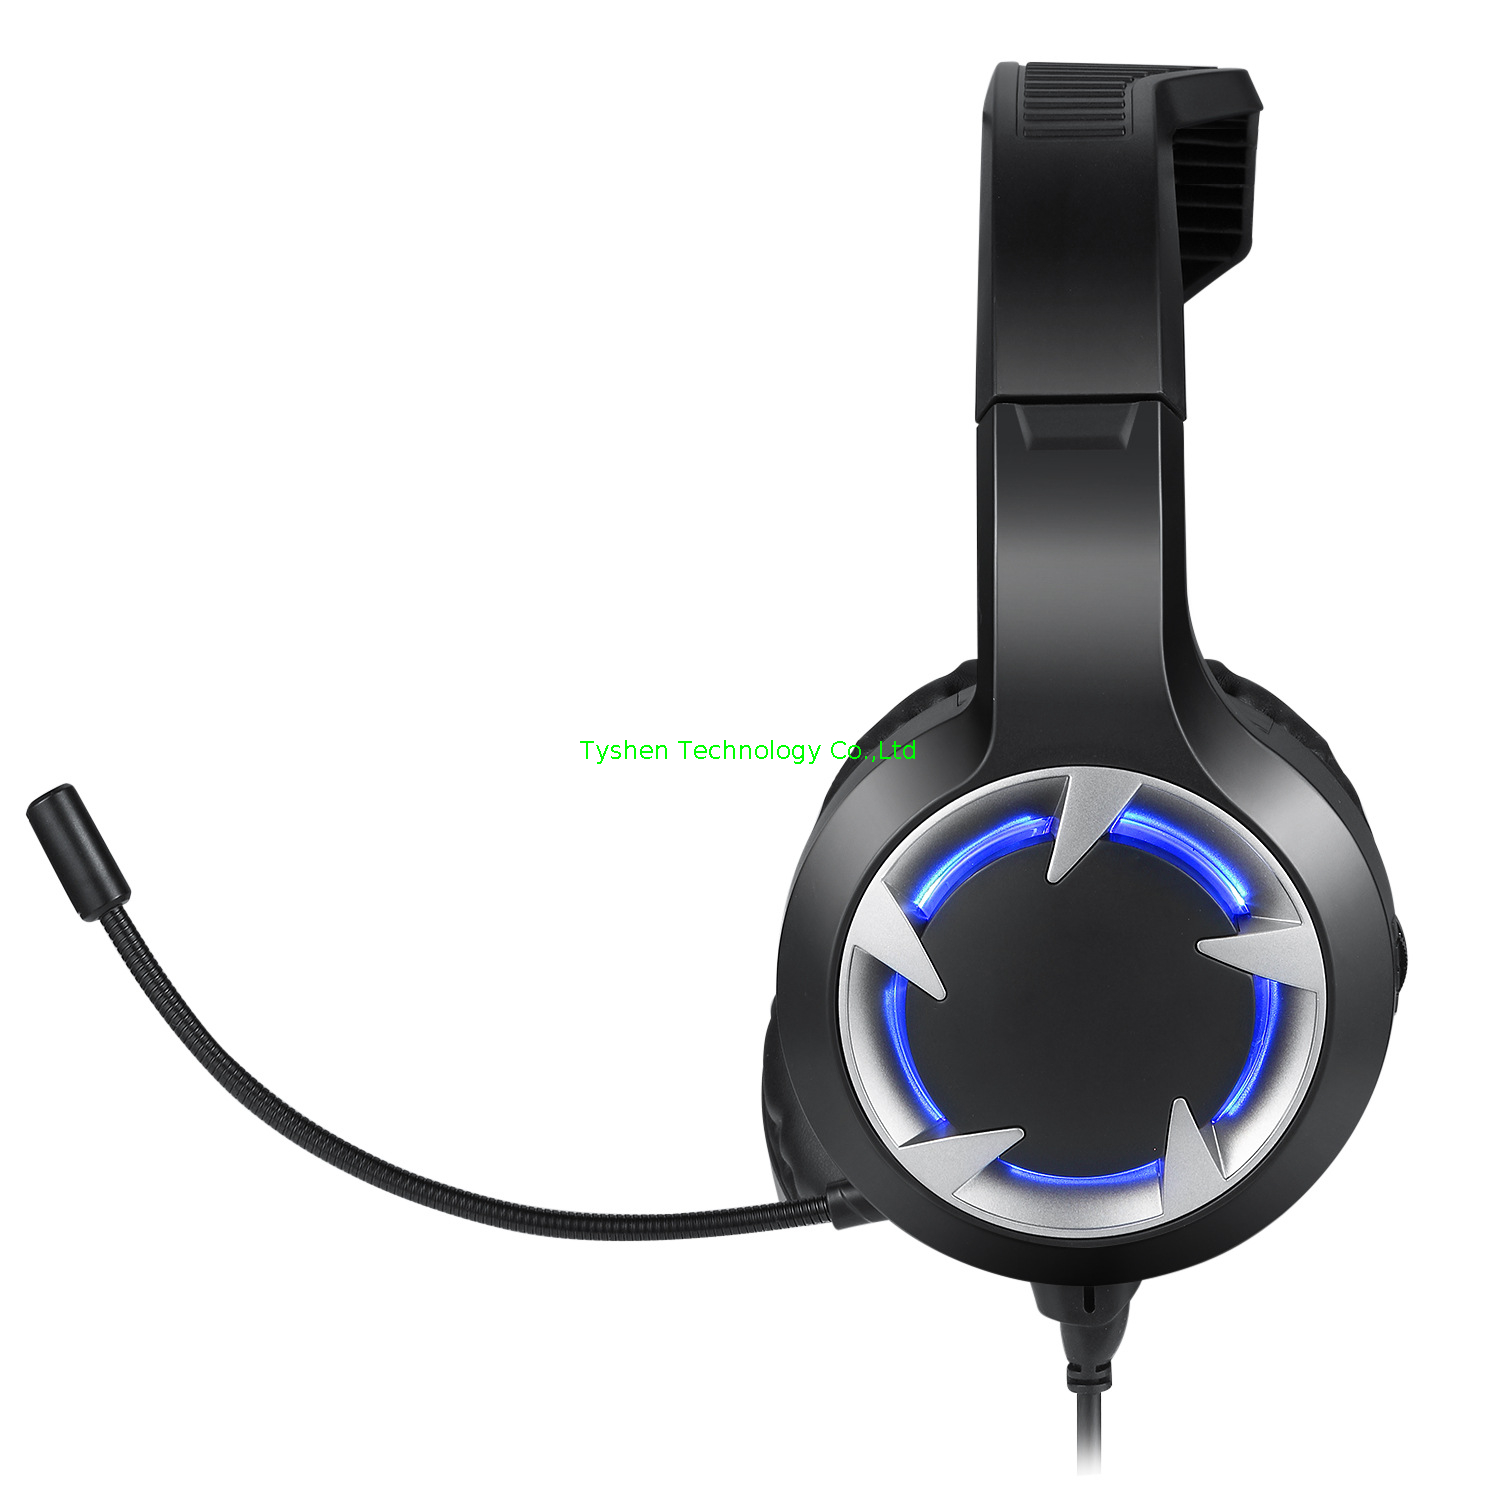 2020 Hot Style Headset Is Suitable for PS4, PS5, xBox, and Desktop PC Noise Cancelling Microphone, 7 Color Lighting